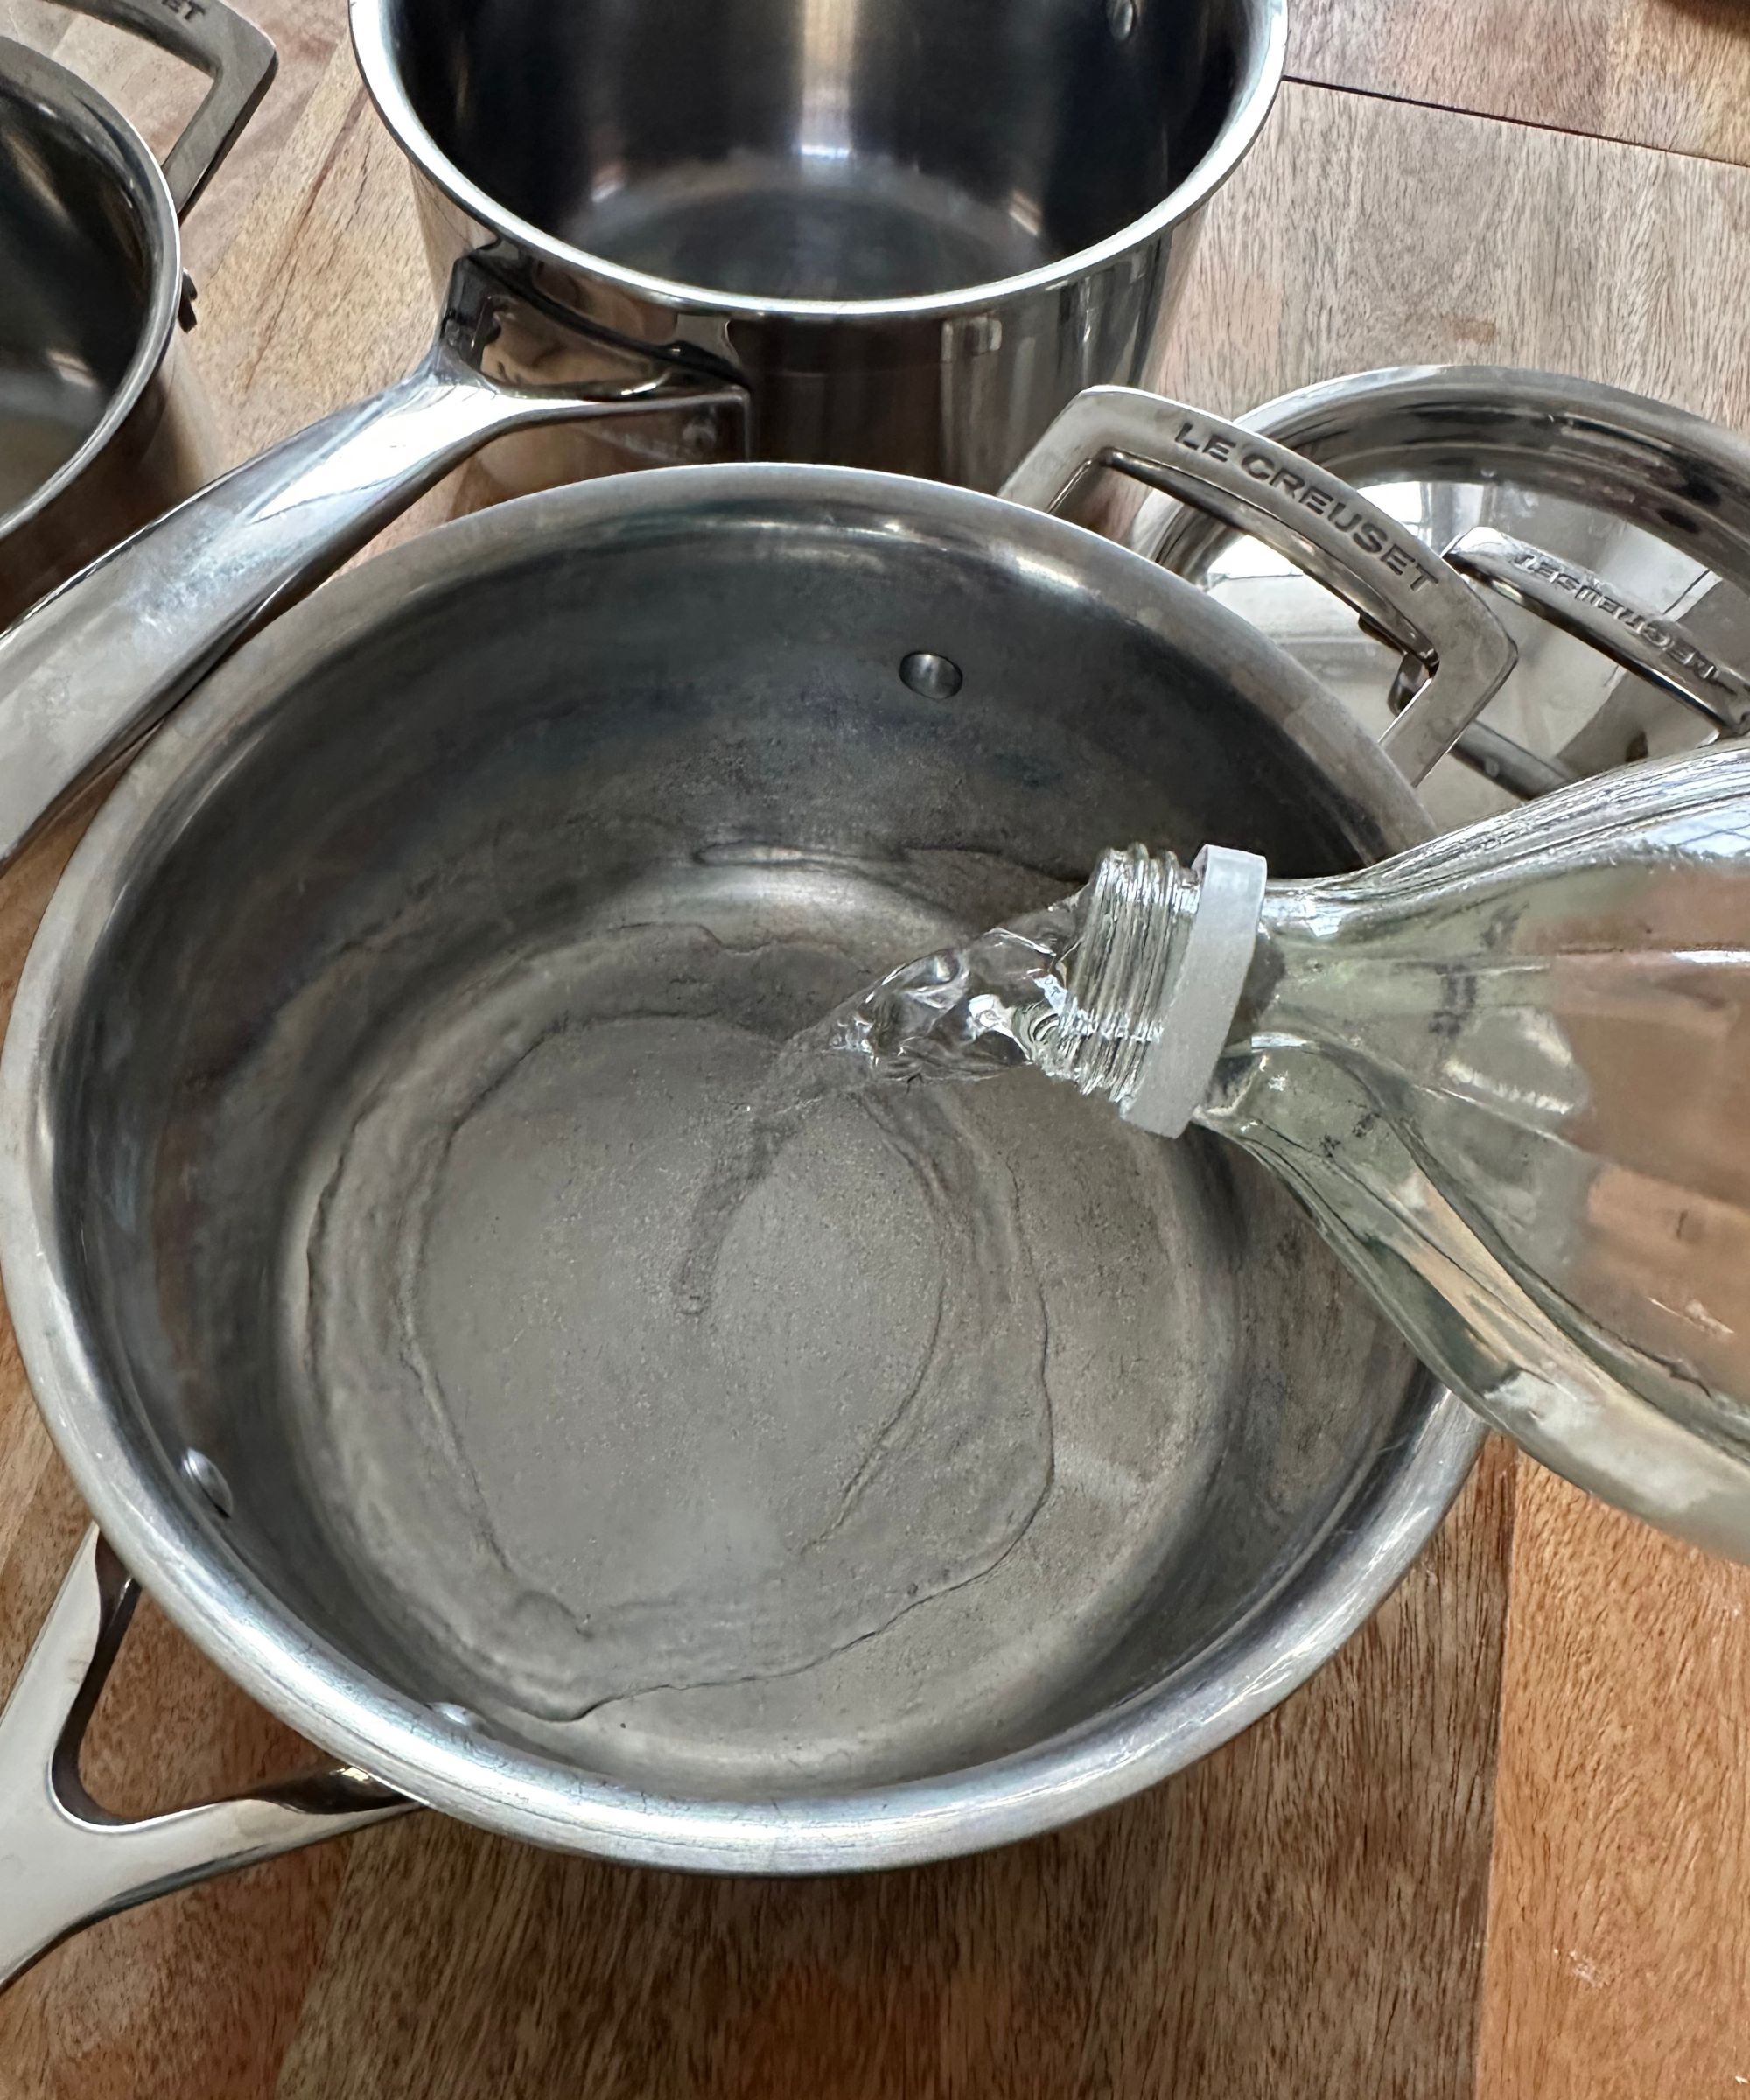 How to clean stainless steel pans with vinegar